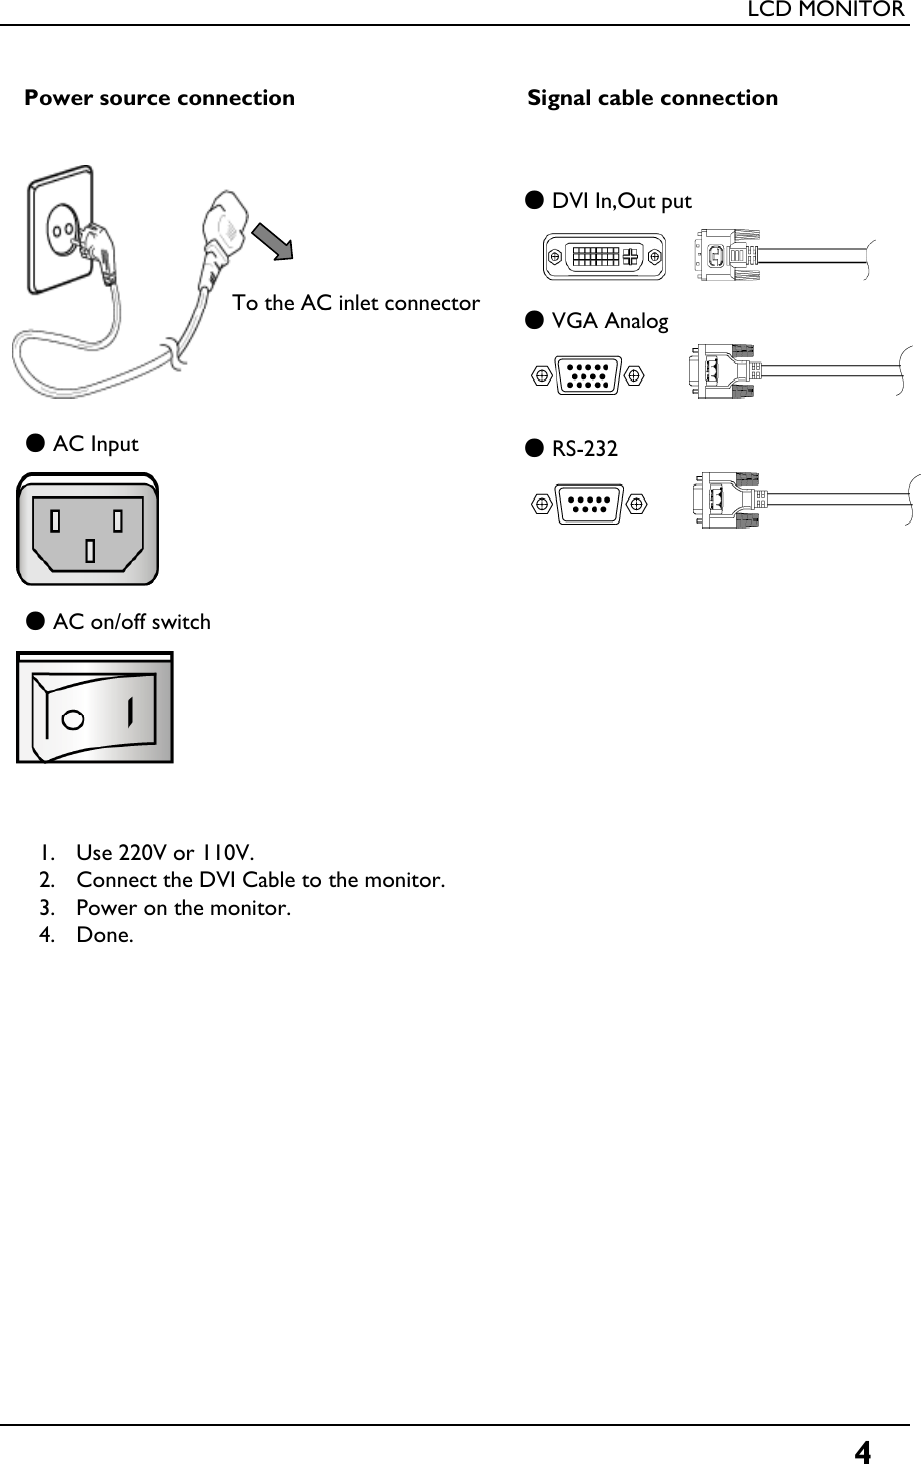 LCD MONITORPower source connection Signal cable connectiongTo the AC inlet connector●DVI In,Out put●AC InputTo the AC inlet connector●VGA Analog●RS-232●AC on/off switch1. Use 220V or 110V.2. Connect the DVI Cable to the monitor.3. Power on the monitor.4. Done.General Specification 4